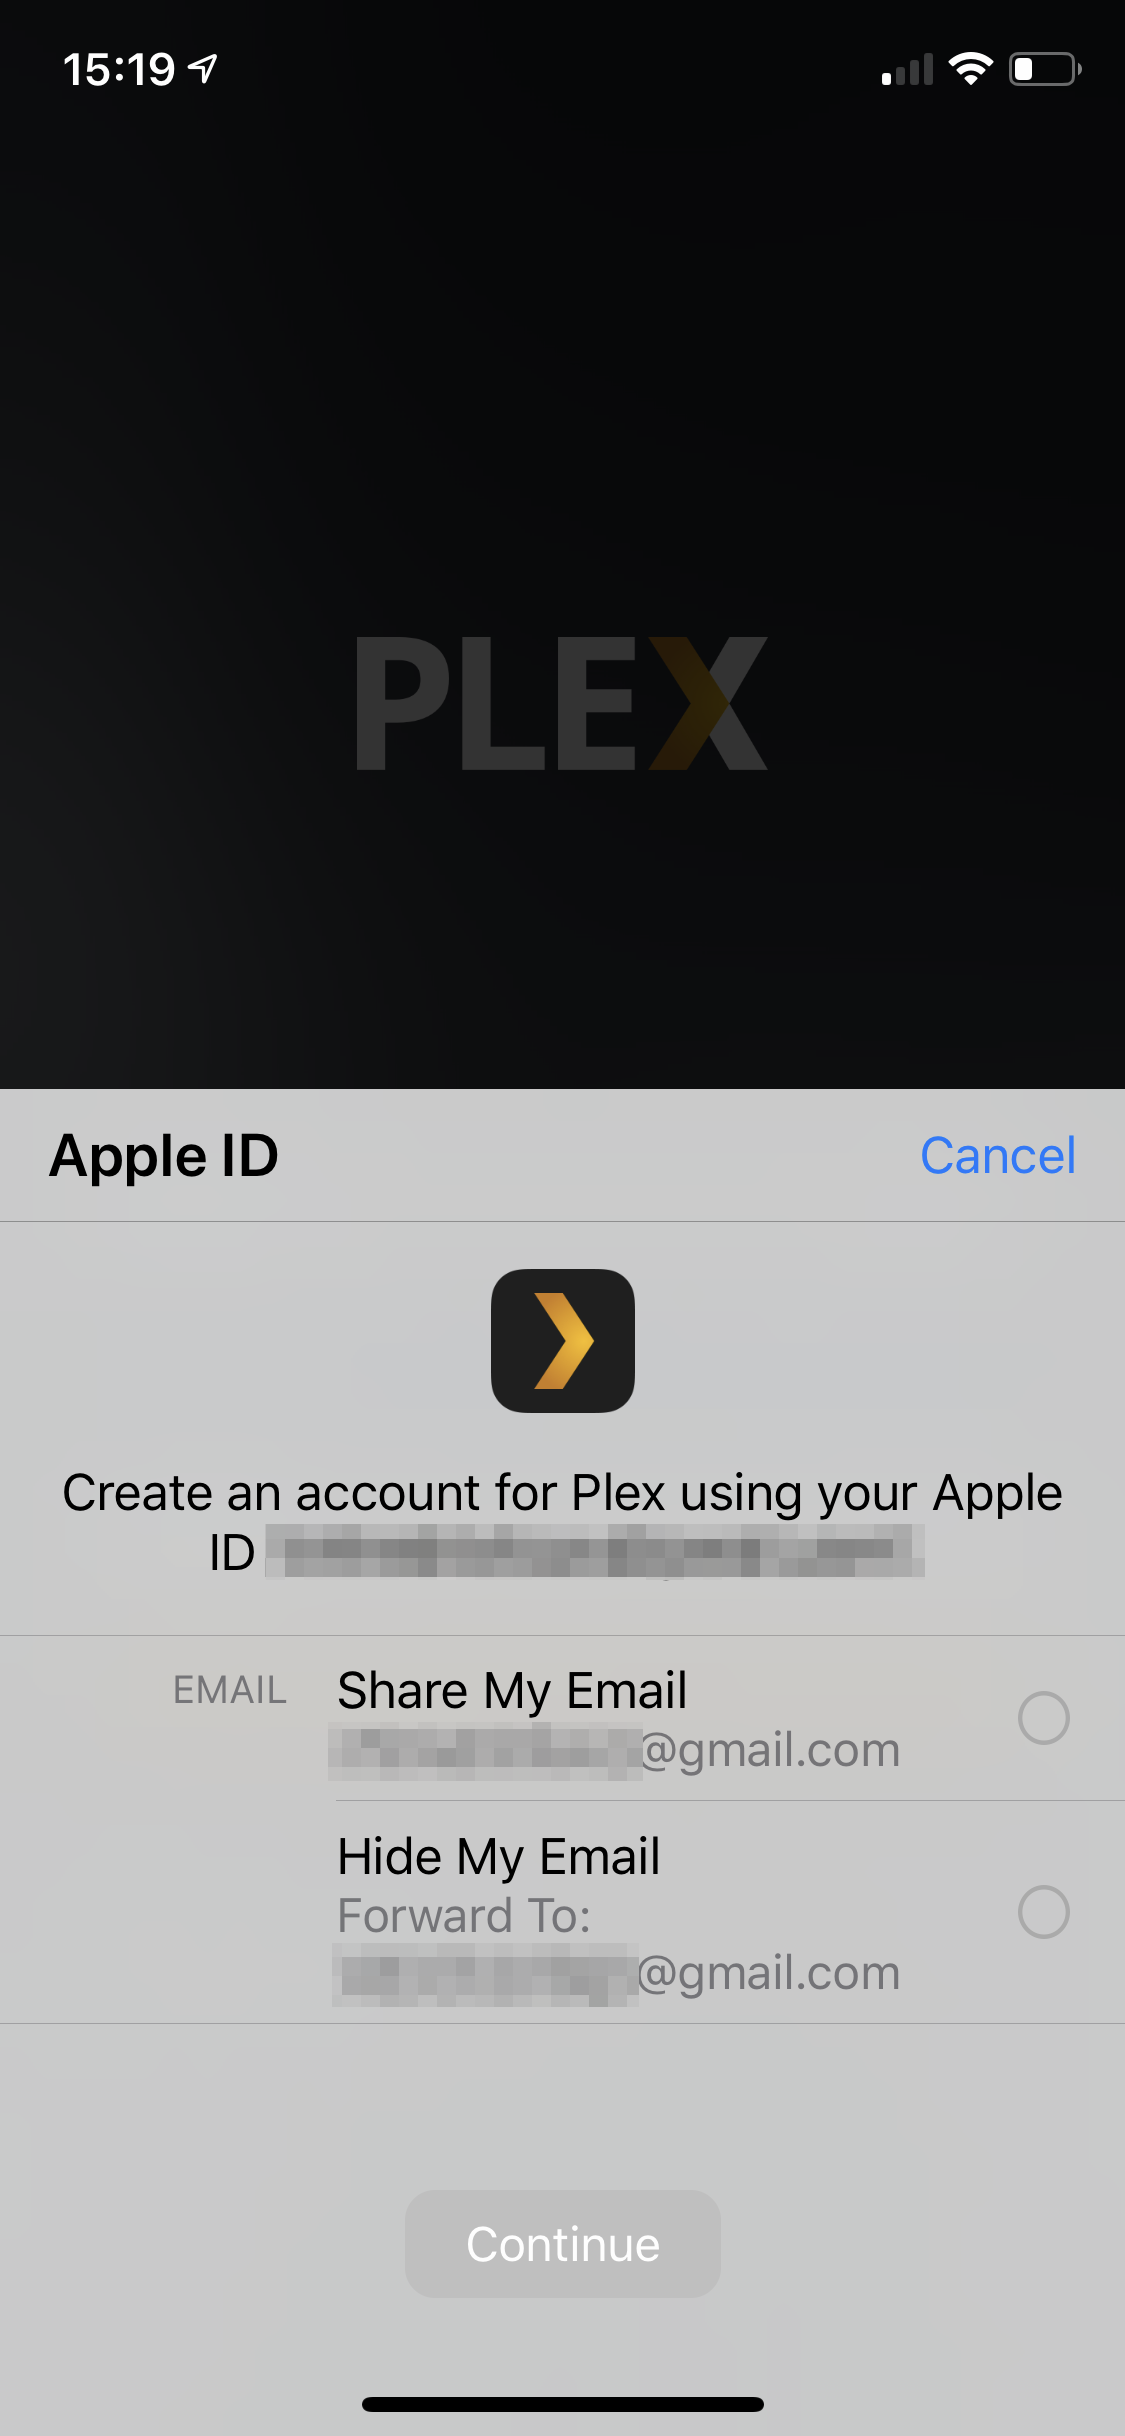 During the process to link an Apple ID for authentication, Apple offers a Hide My Email privacy option